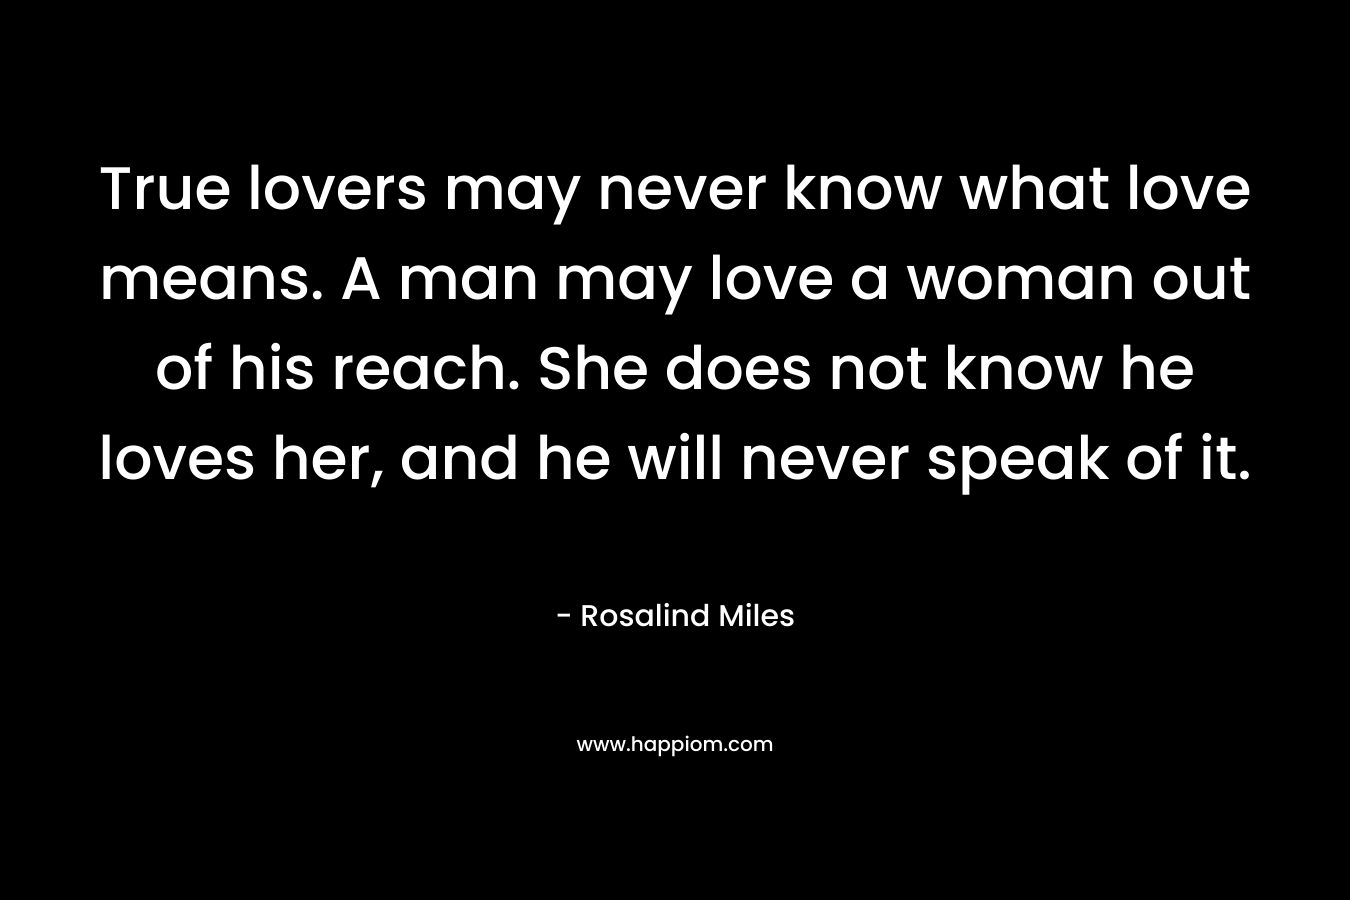 True lovers may never know what love means. A man may love a woman out of his reach. She does not know he loves her, and he will never speak of it. – Rosalind Miles